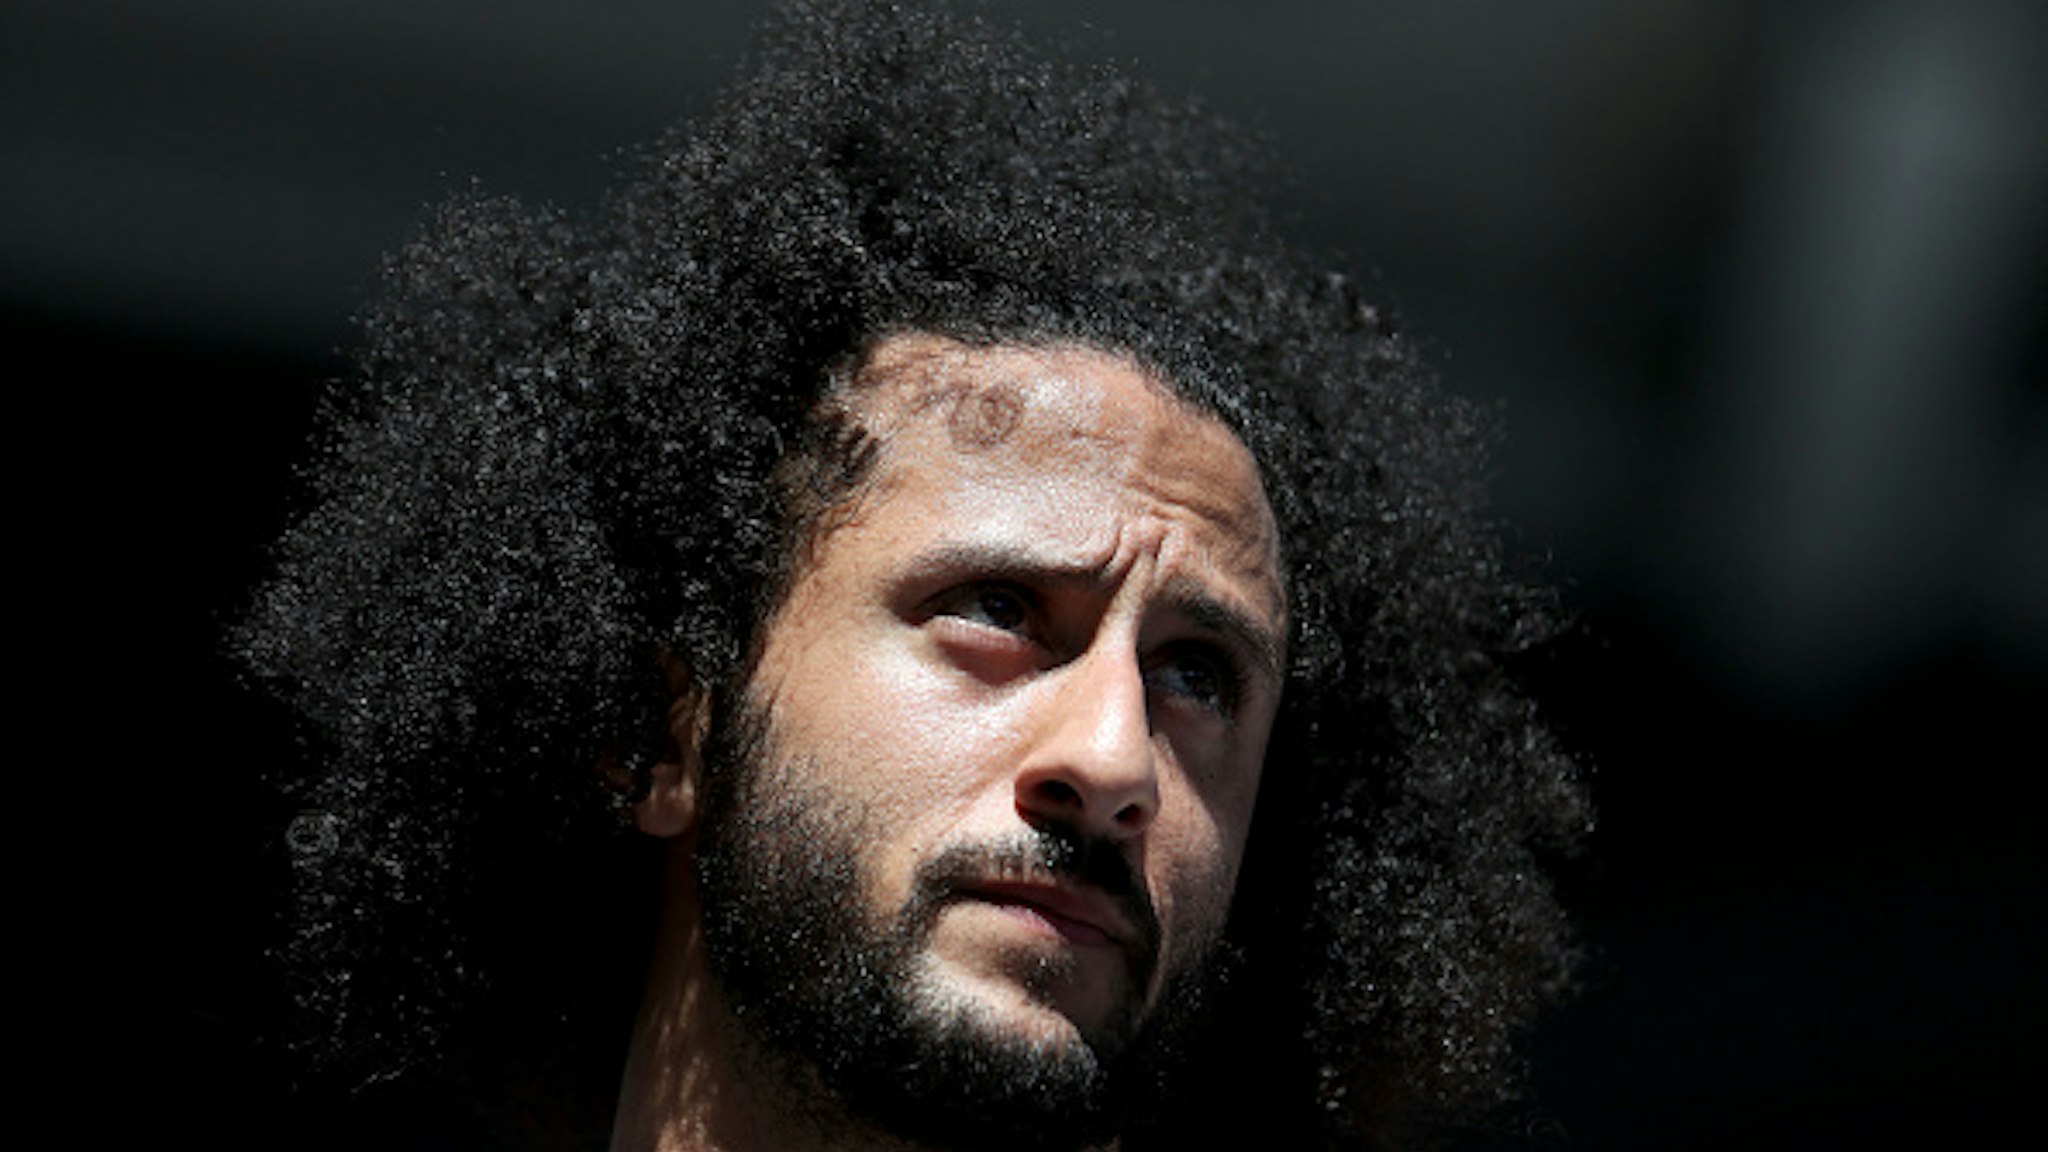 NEW YORK, NEW YORK - AUGUST 29: Former San Francisco 49er Colin Kaepernick watches a Women's Singles second round match between Naomi Osaka of Japan and Magda Linette of Poland on day four of the 2019 US Open at the USTA Billie Jean King National Tennis Center on August 29, 2019 in Queens borough of New York City.